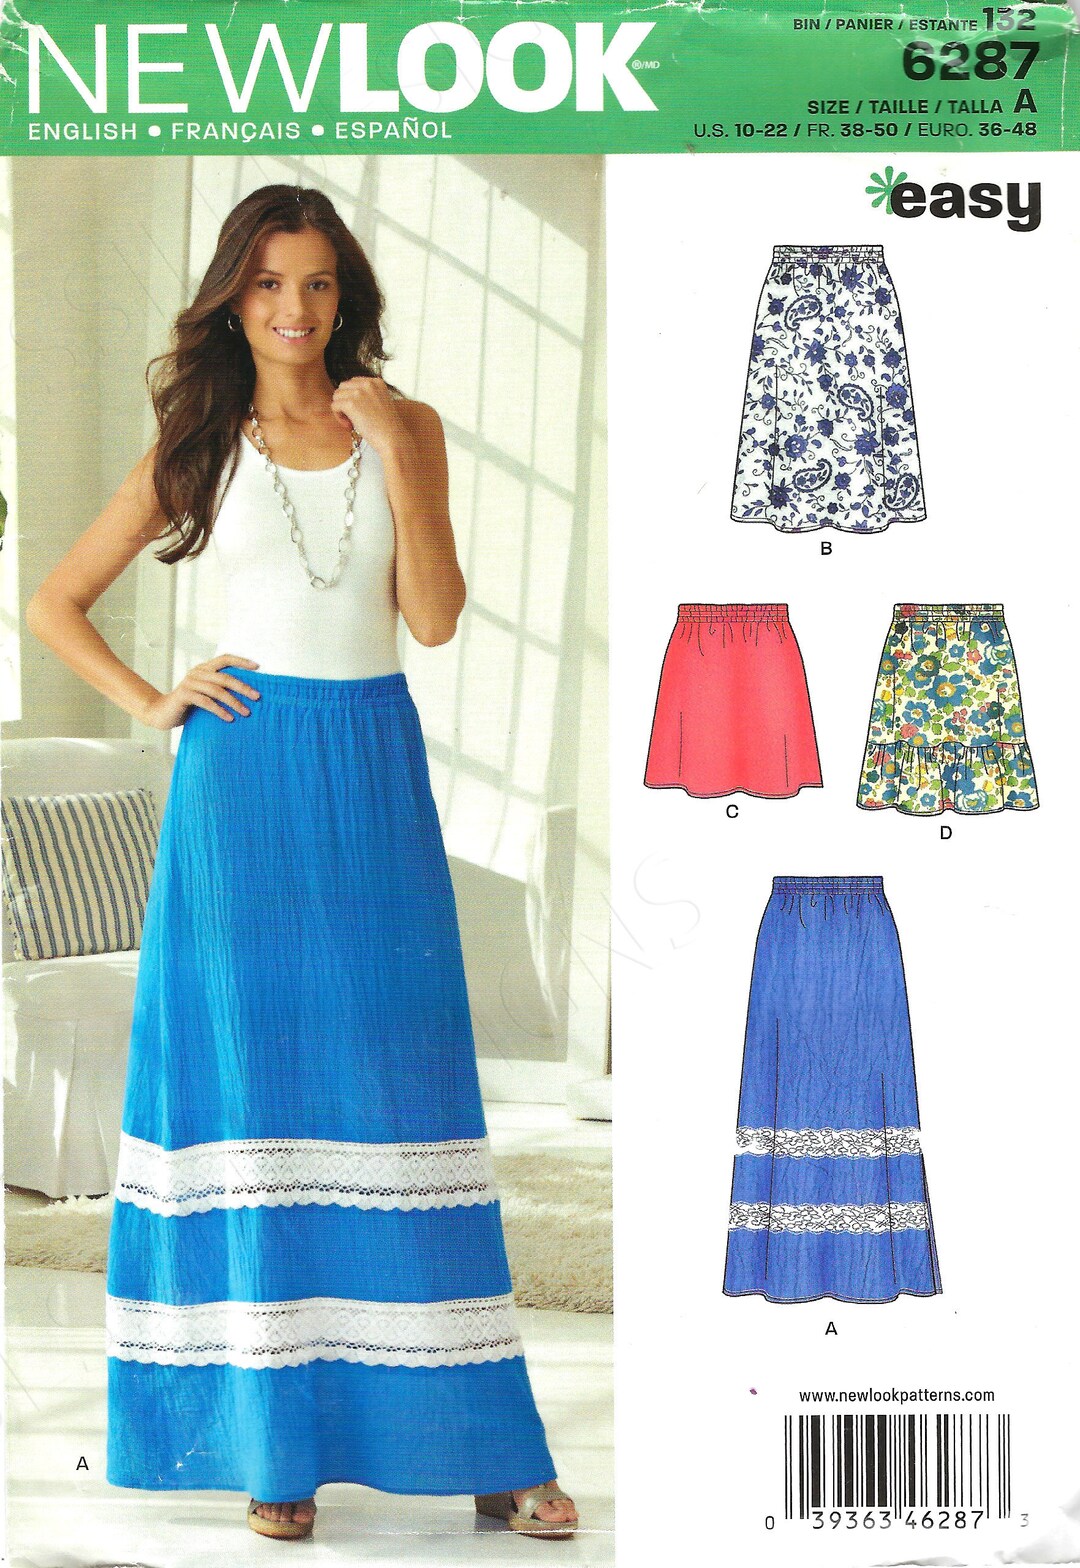 New Look New Look Pattern 549 6287 Misses' Woven Skirts in - Etsy